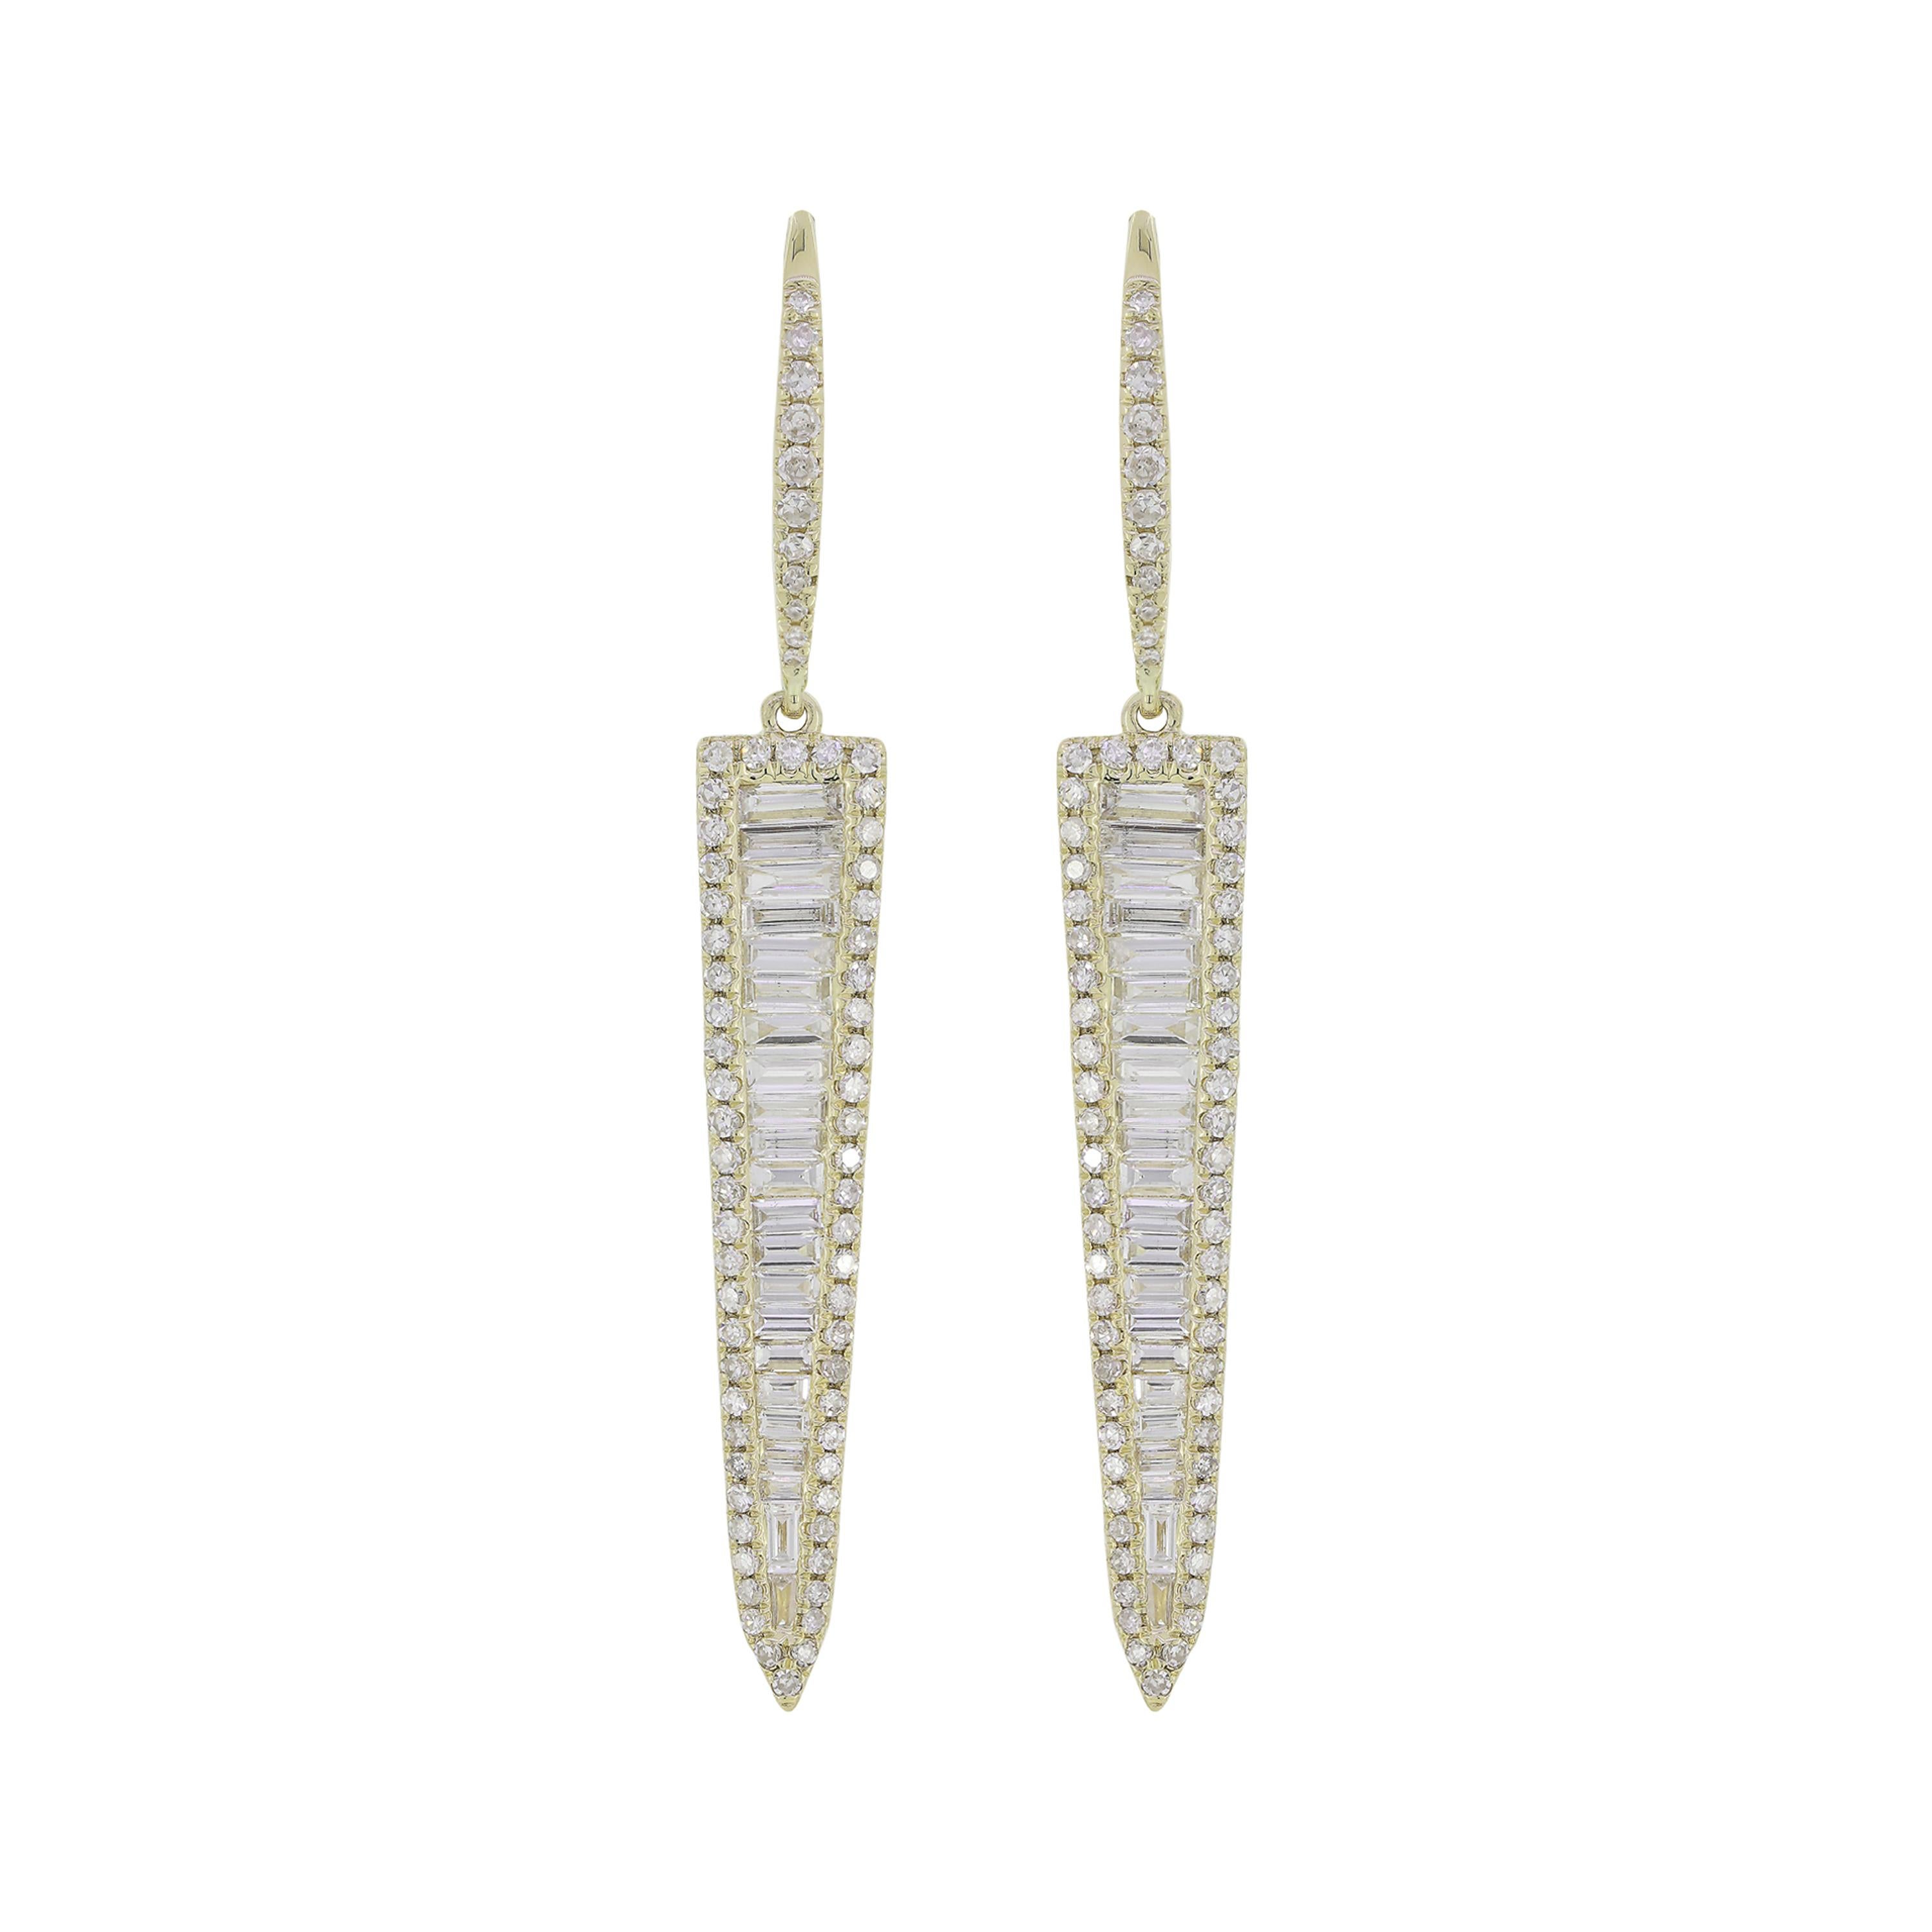 Featured with a triangular drop studded with baguette diamonds framed within pave round diamonds by Luxle. These earrings are made of 138 round diamonds and 42 baguette diamonds. They have an ear wire back.

Please follow the Luxury Jewels